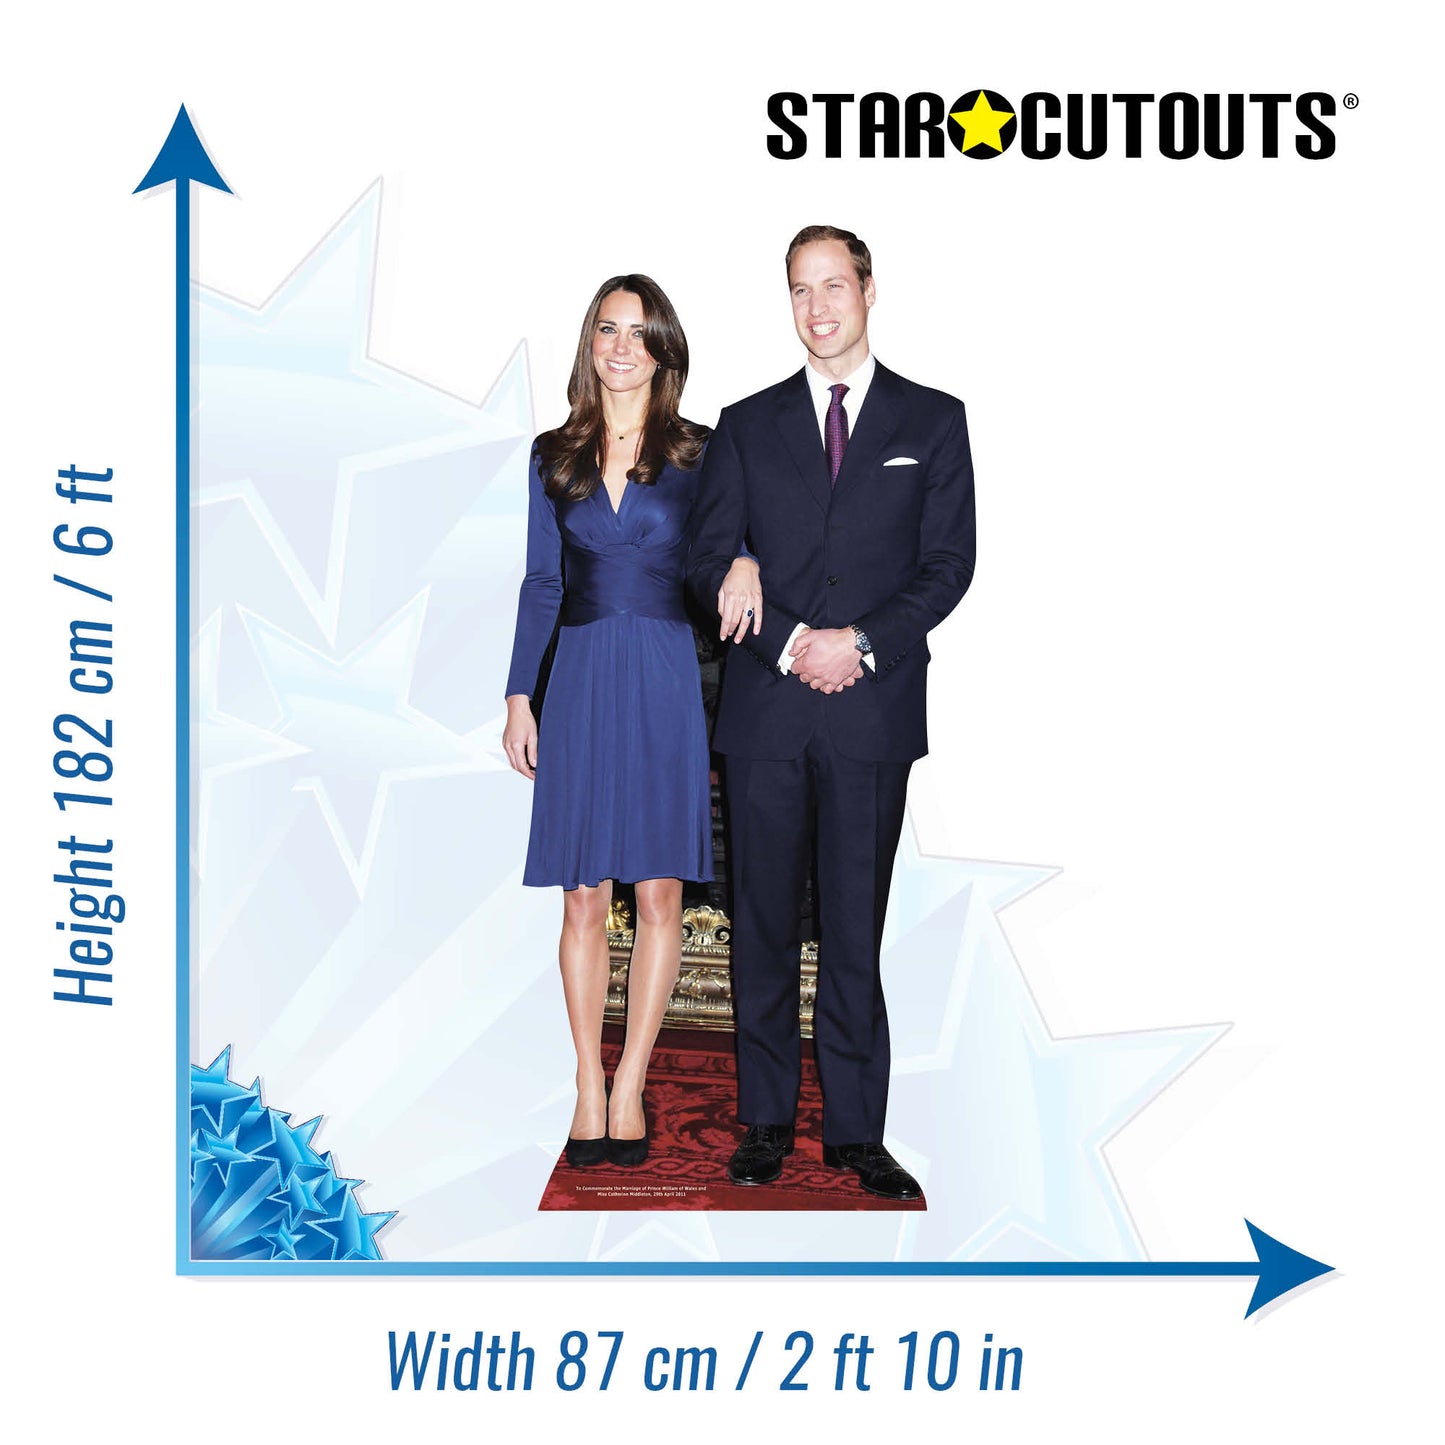 SC243 Prince William and Miss Middleton Cardboard Cut Out Height 182cm